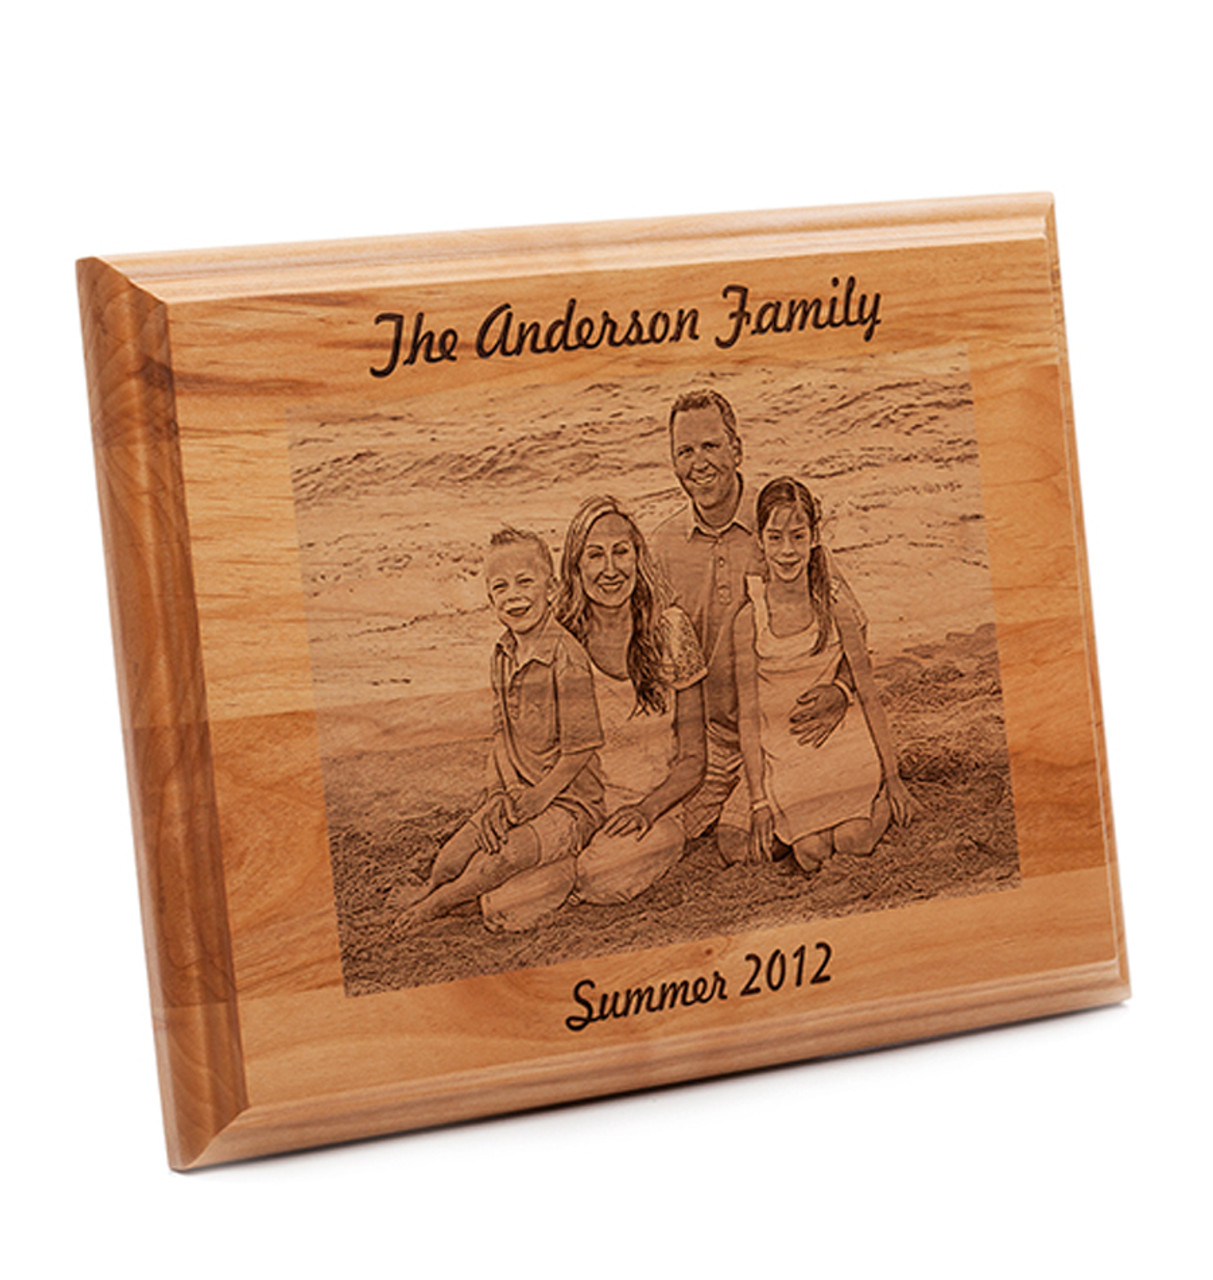 Personalized Wood Plaques  Custom Wood Plaques Creative Laser